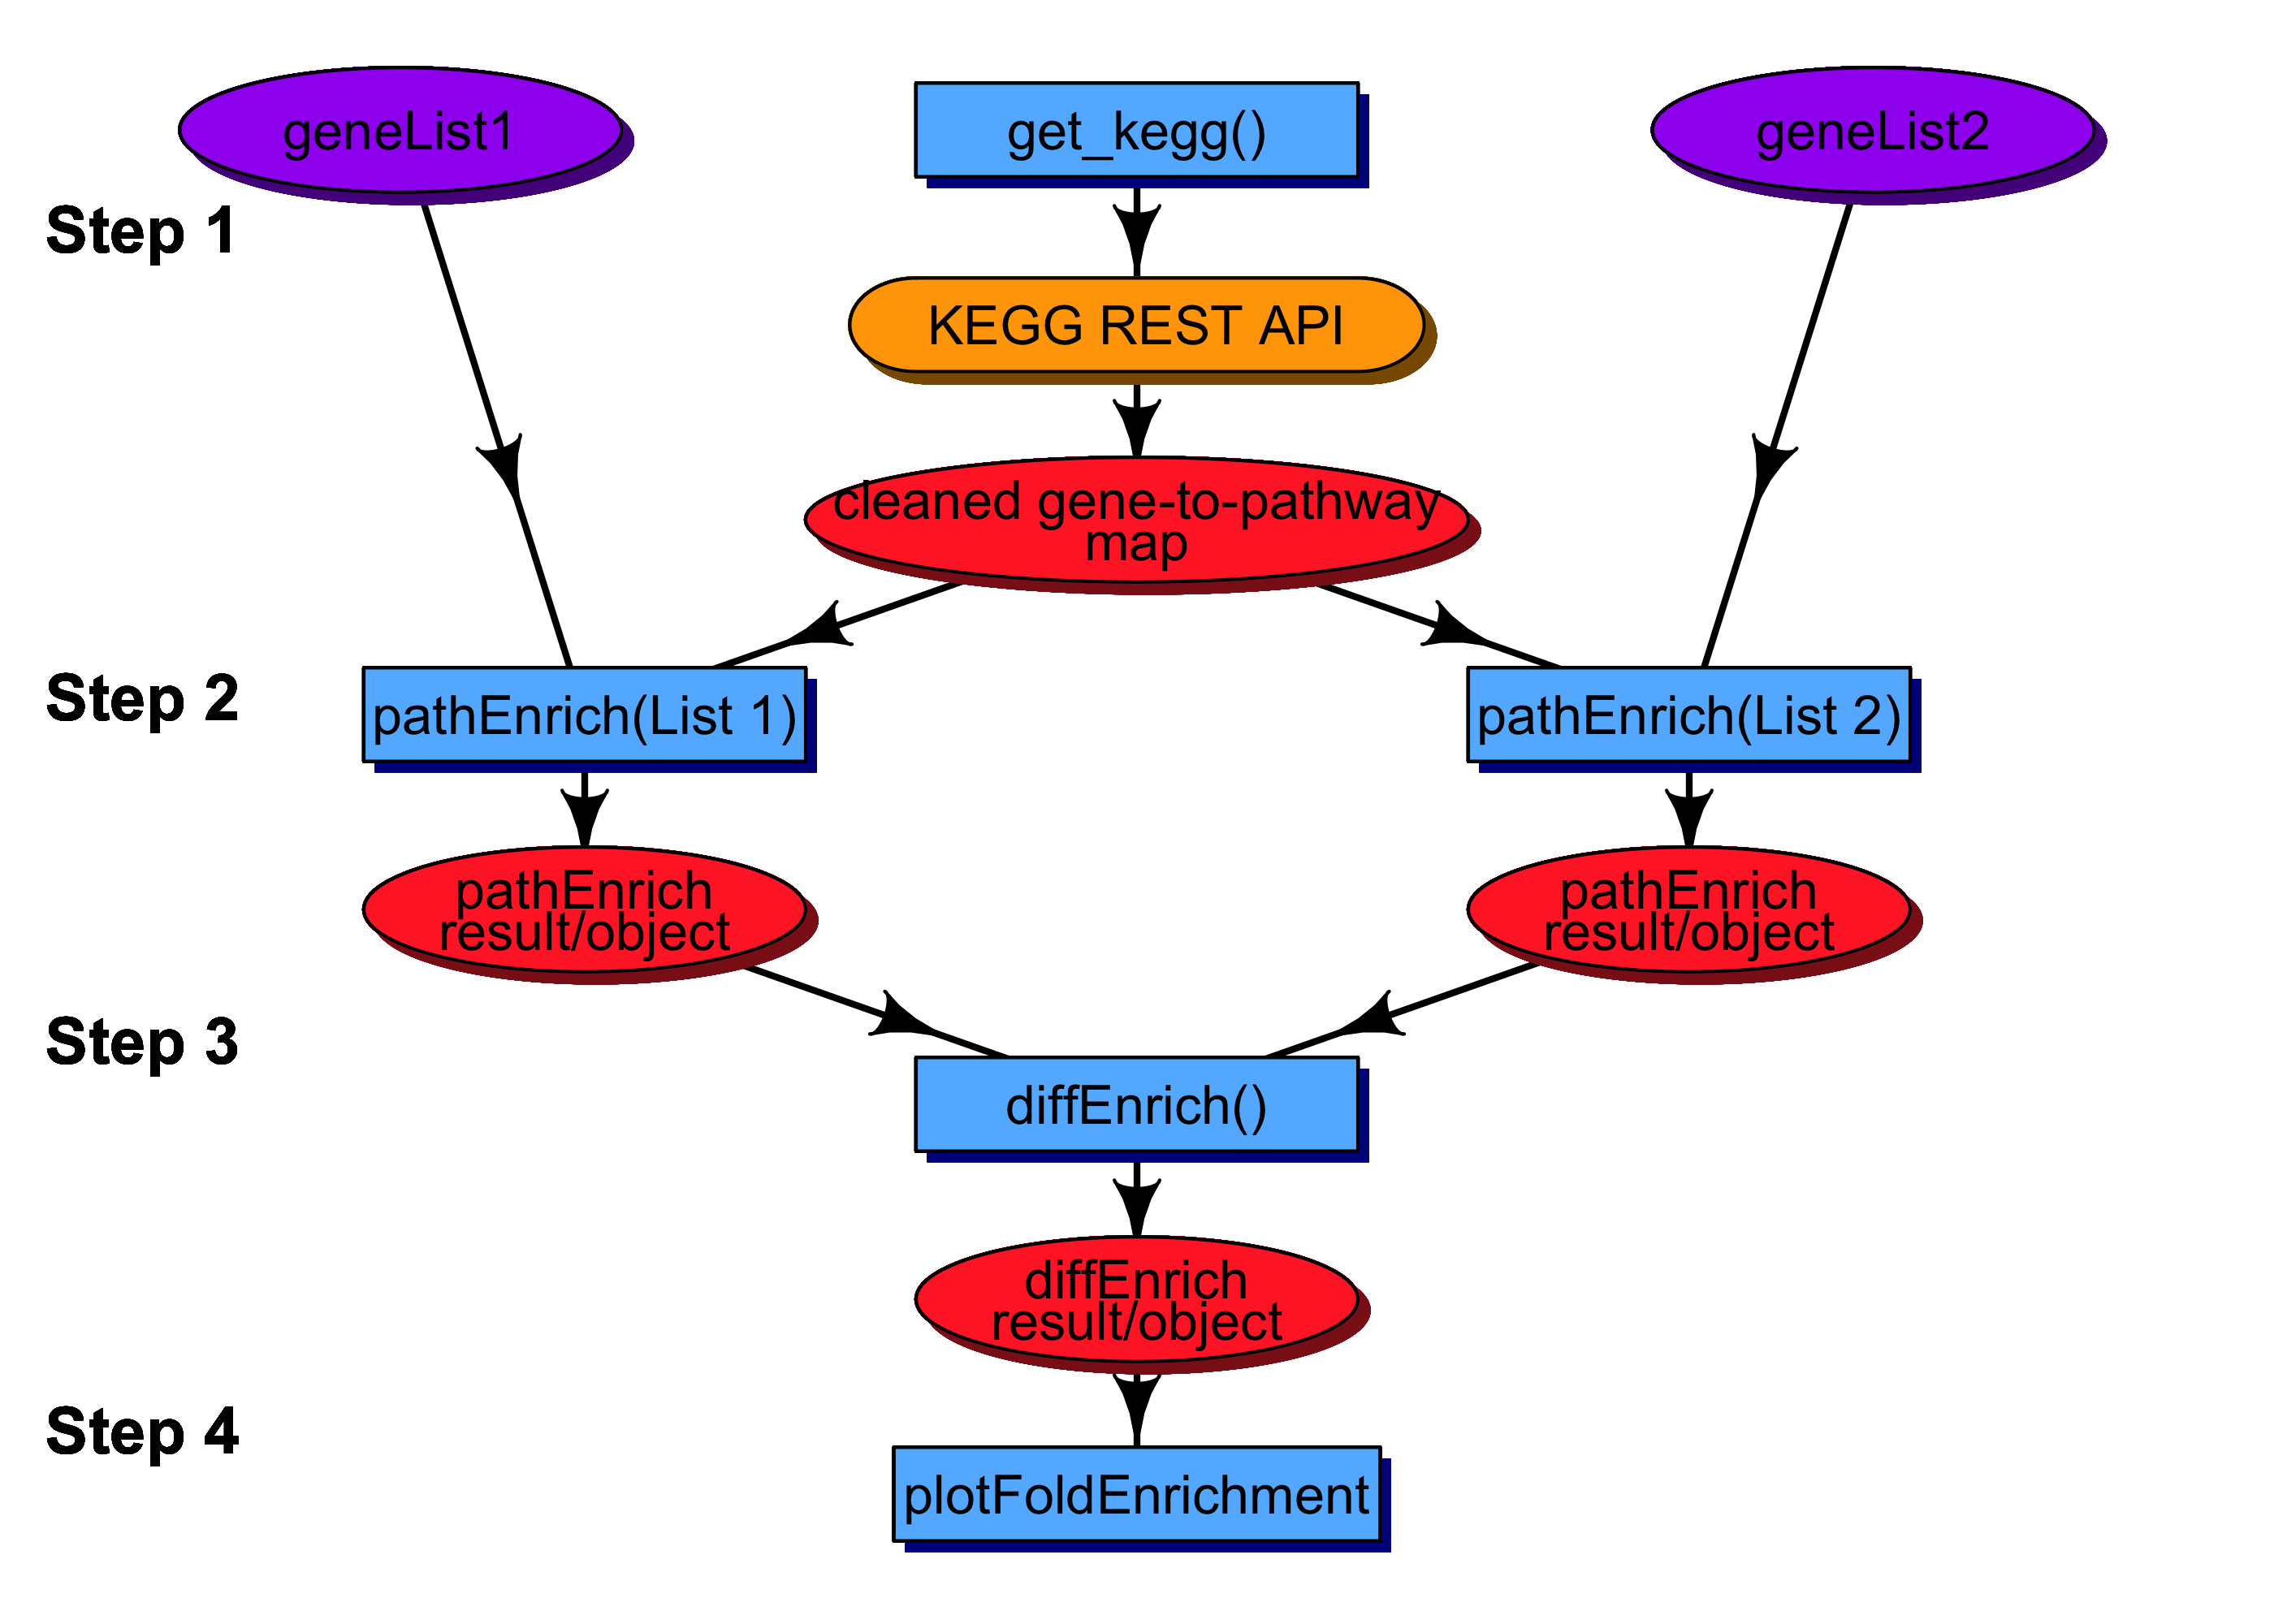 Figure 1. diffEnrich Analysis pipeline. Functions within the diffEnrich package are represented by blue rectangles. The data that must be provided by the user is represented by the purple ovals. Data objects generated by a function in diffEnrich are represented by red ovals. The external call of the get_kegg function to the KEGG REST API is represented in yellow.